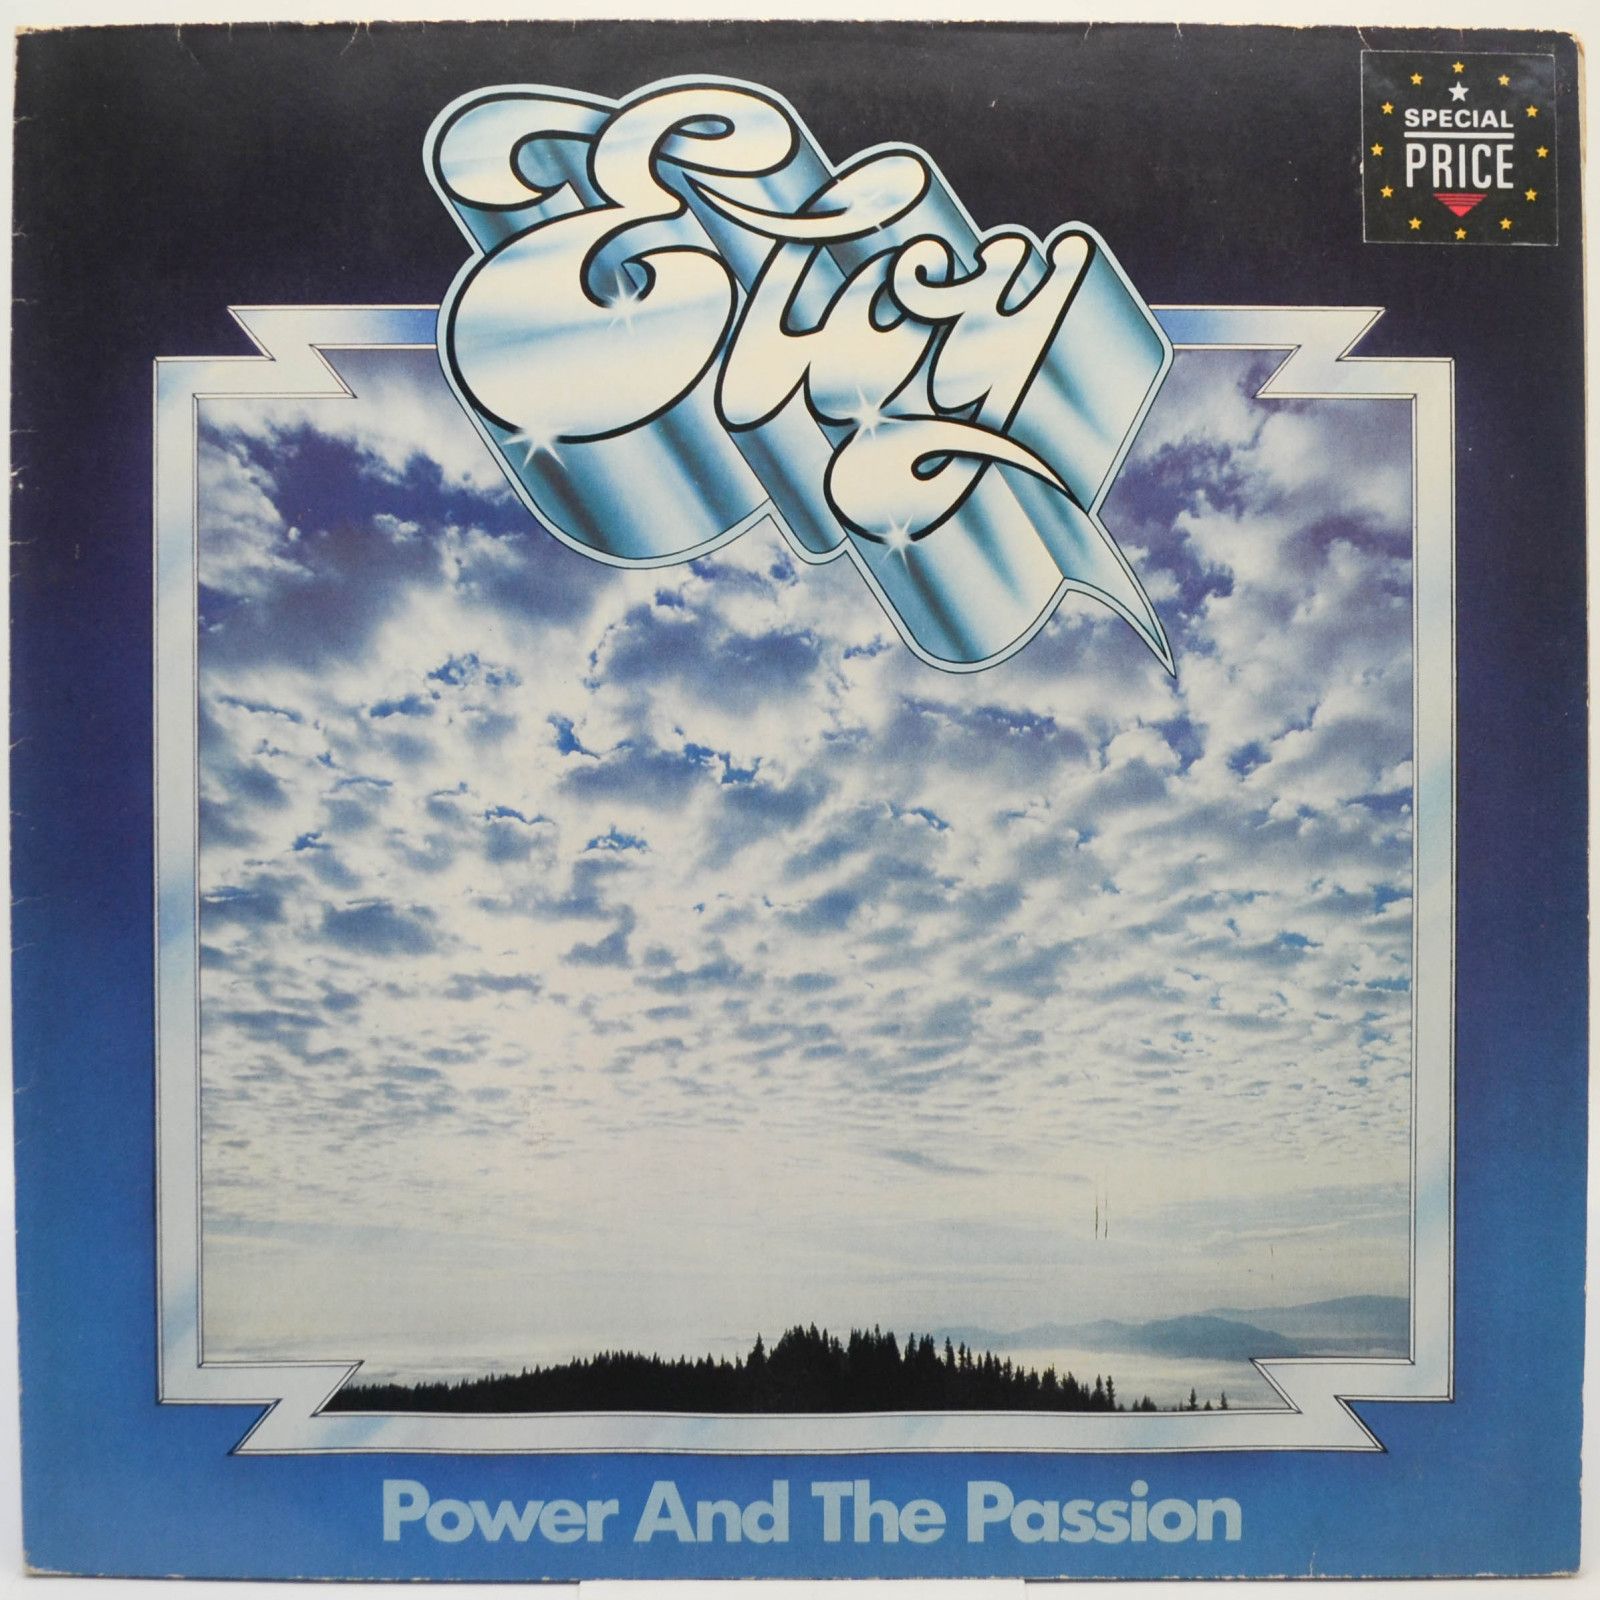 Eloy — Power And The Passion, 1975